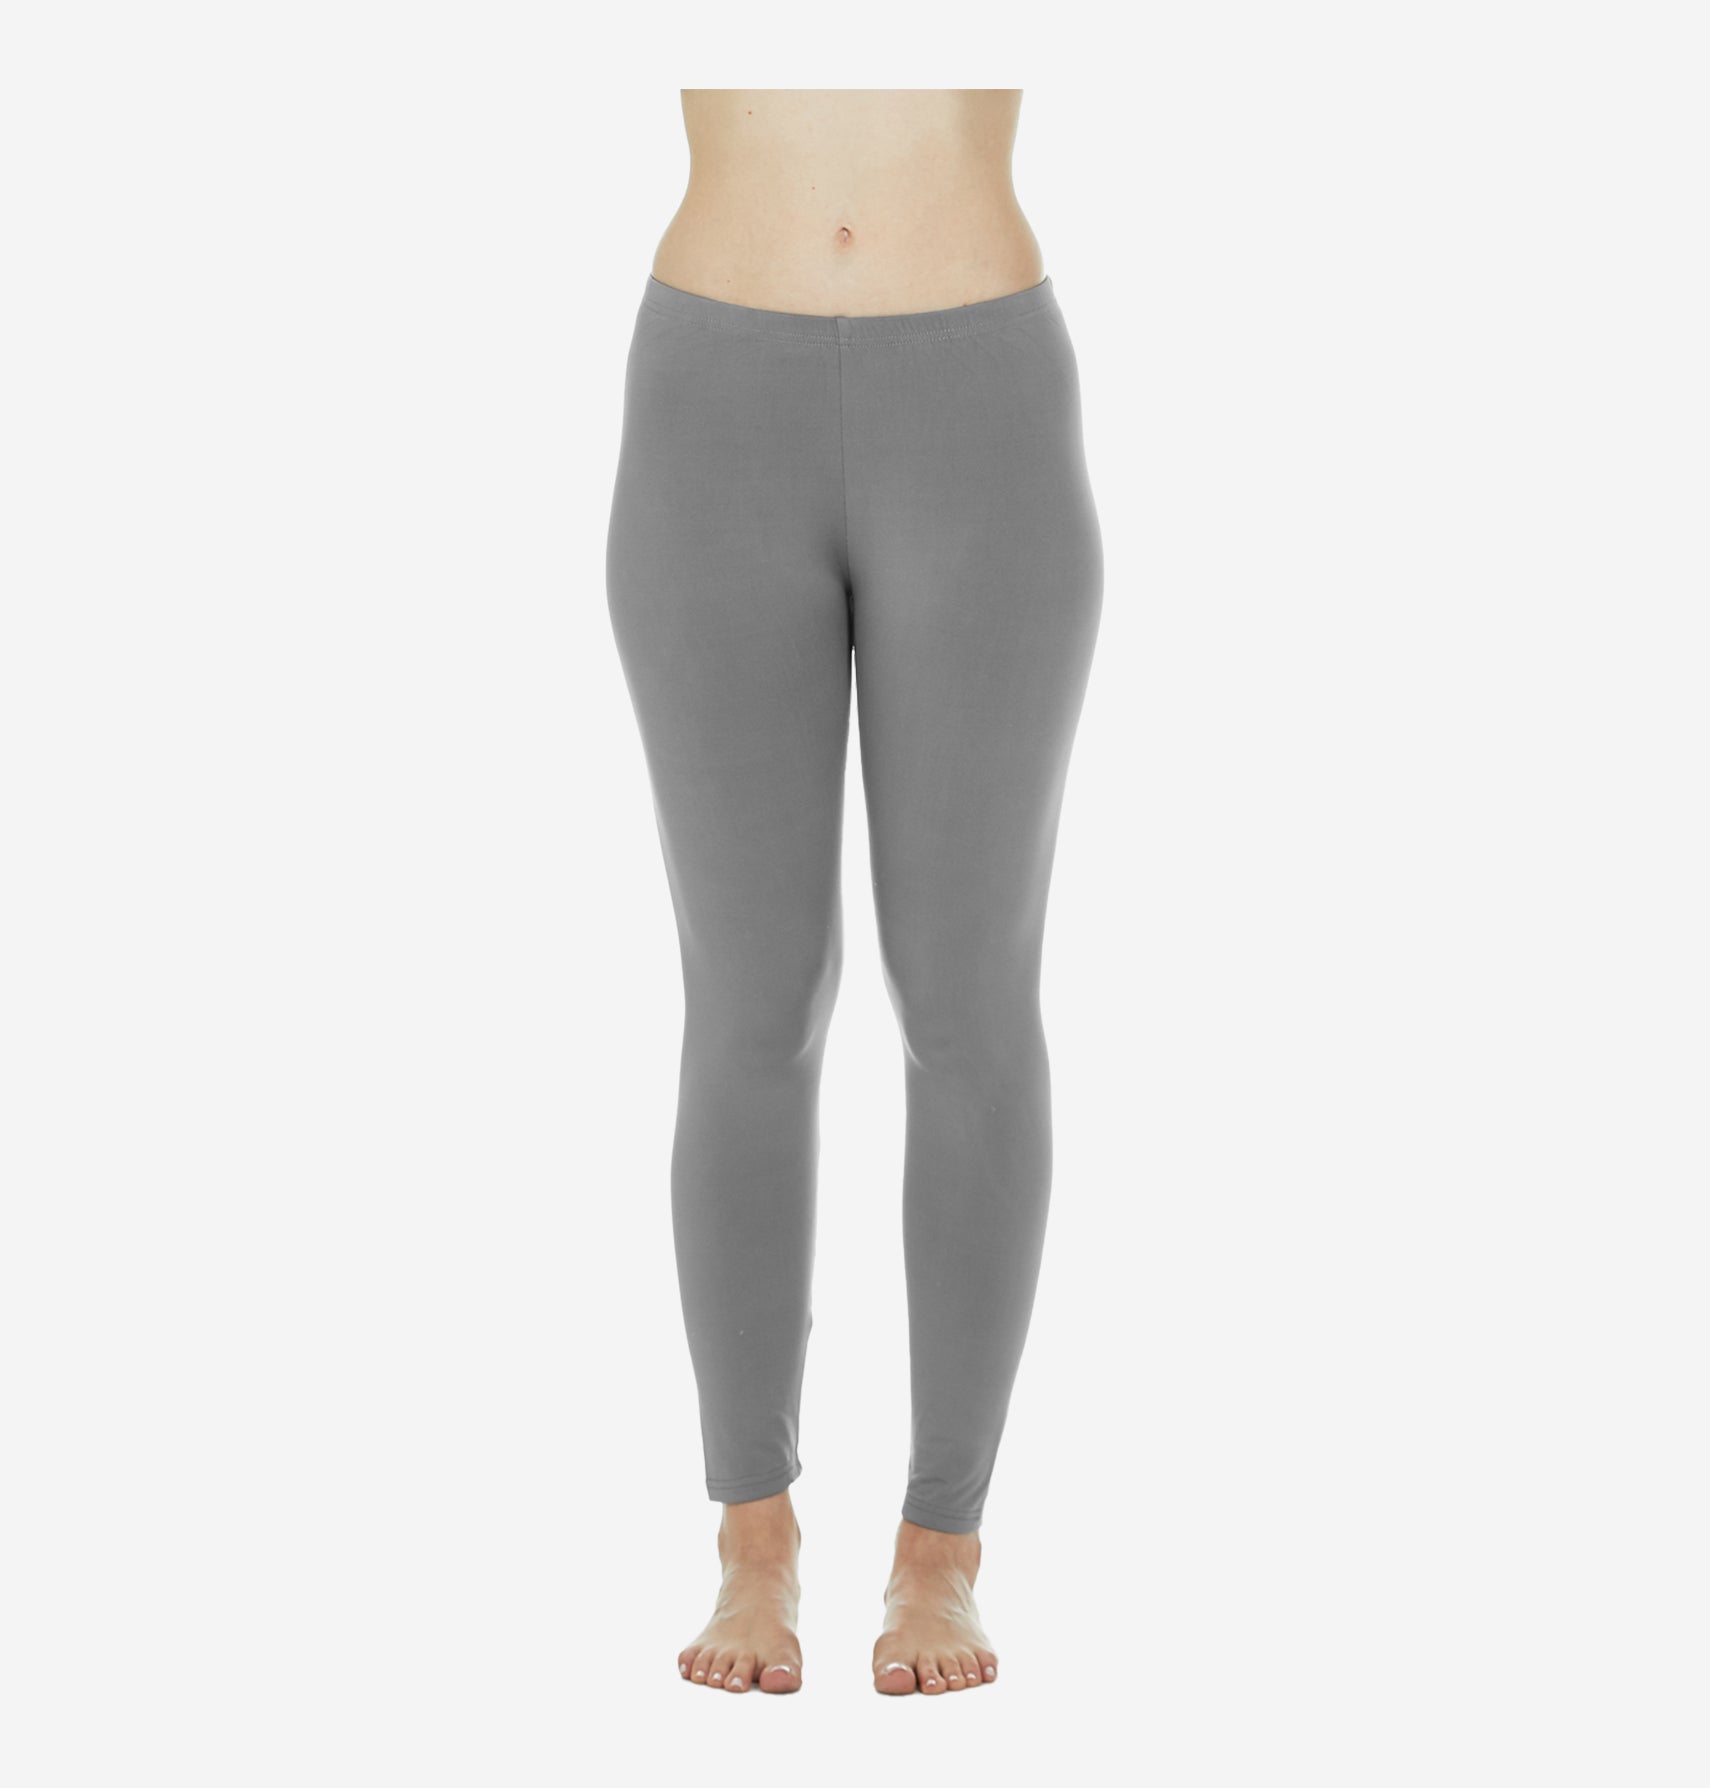 Pack Of 3 Pieces One-Size Thermal Leggings For Women Random Colors